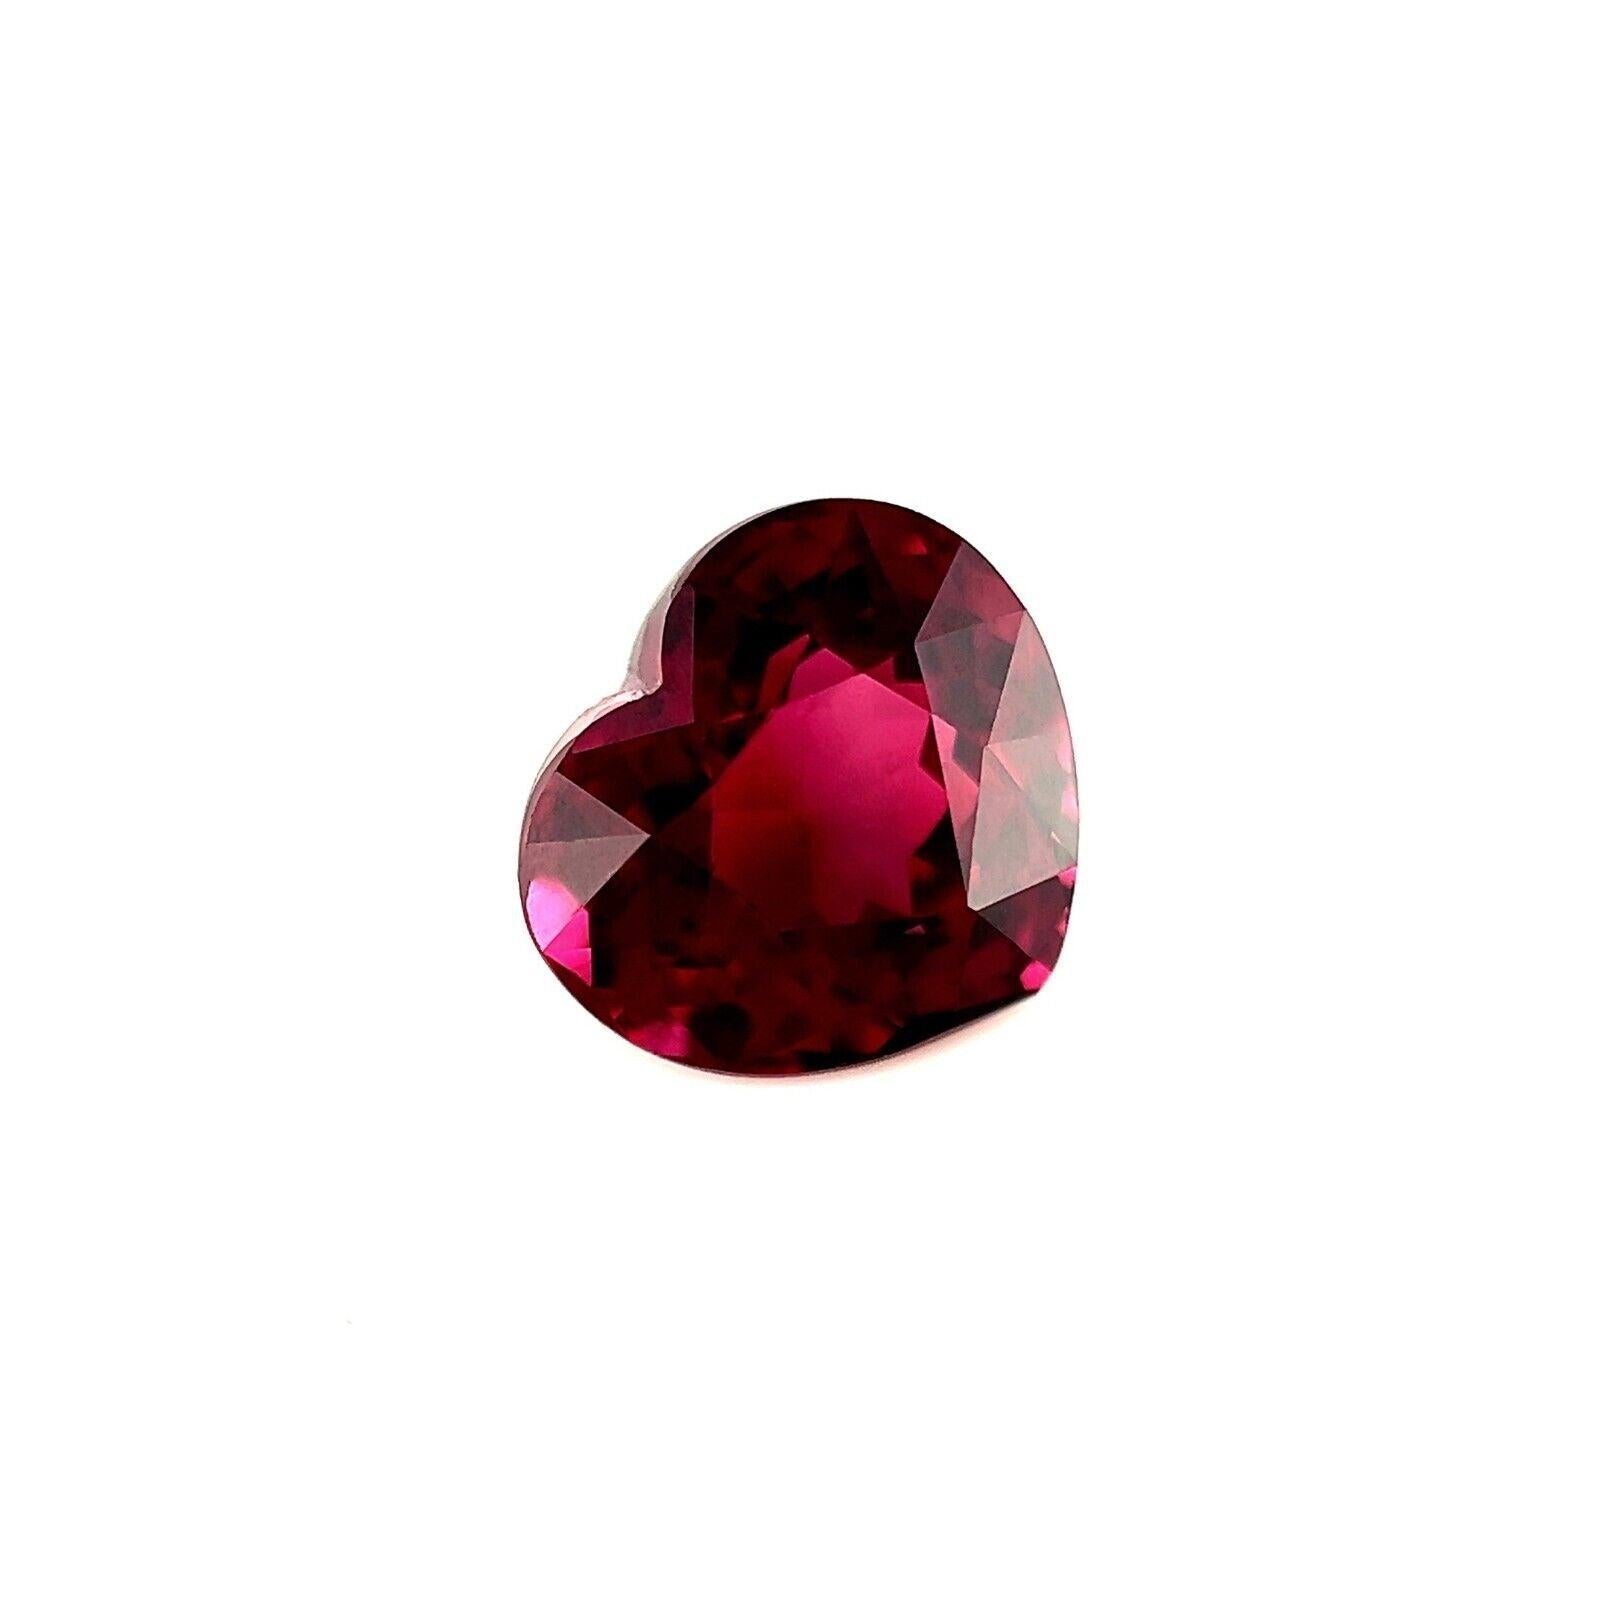 Fine 2.70ct Purplish Pink Rhodolite Garnet Heart Cut Loose Gem 8.4x7.6mm VS

Fine Natural Rhodolite Garnet Loose Gemstone.
2.70 Carat with a beautiful pink purplish colour and very good clarity, VS.
This stone also has an excellent heart cut with